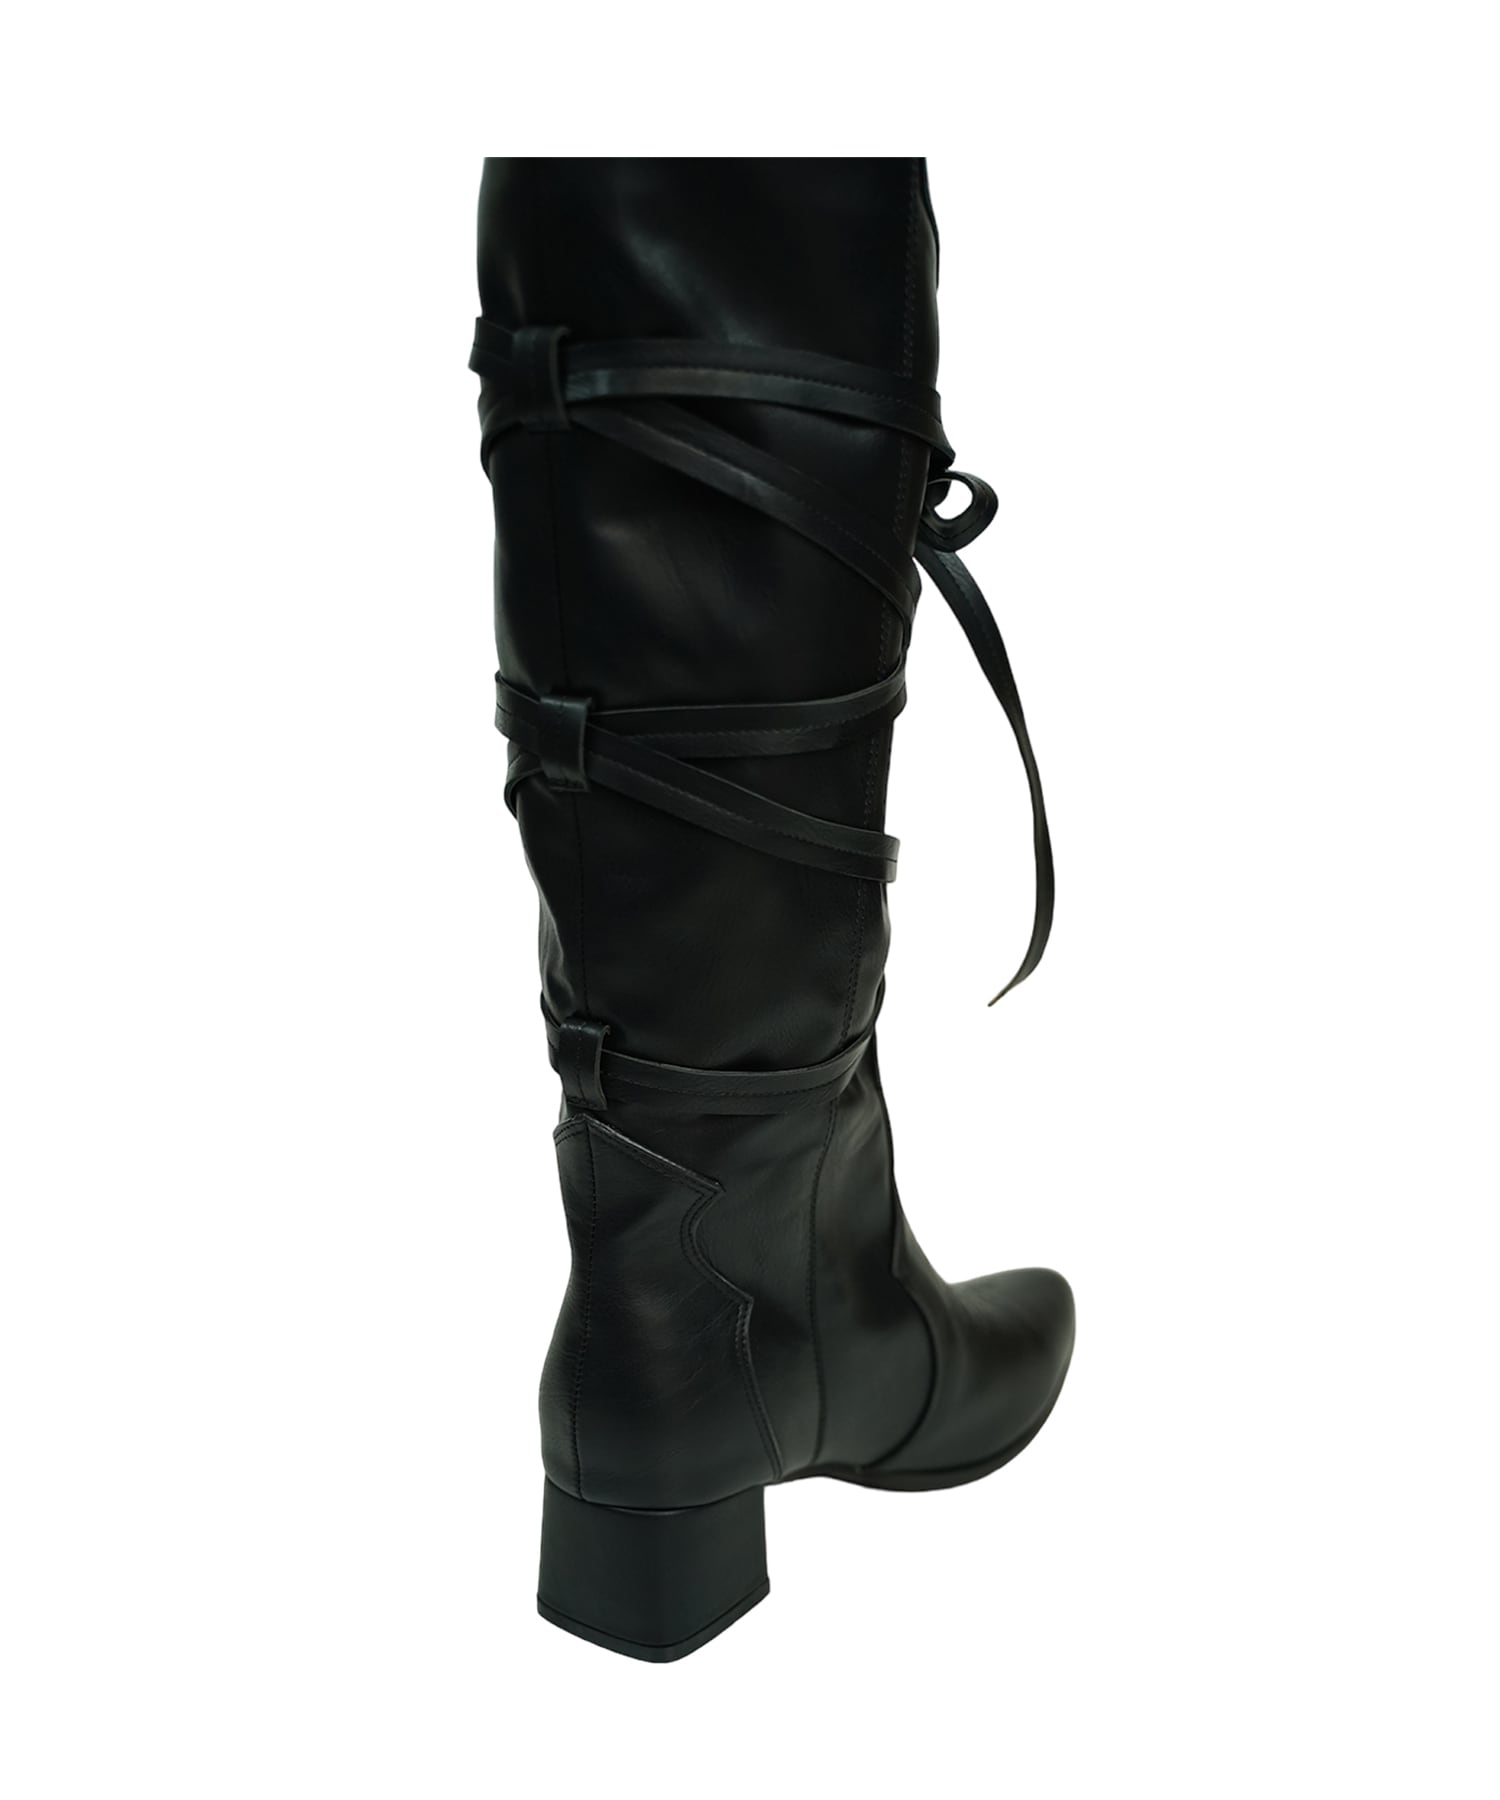 2way strap western boots